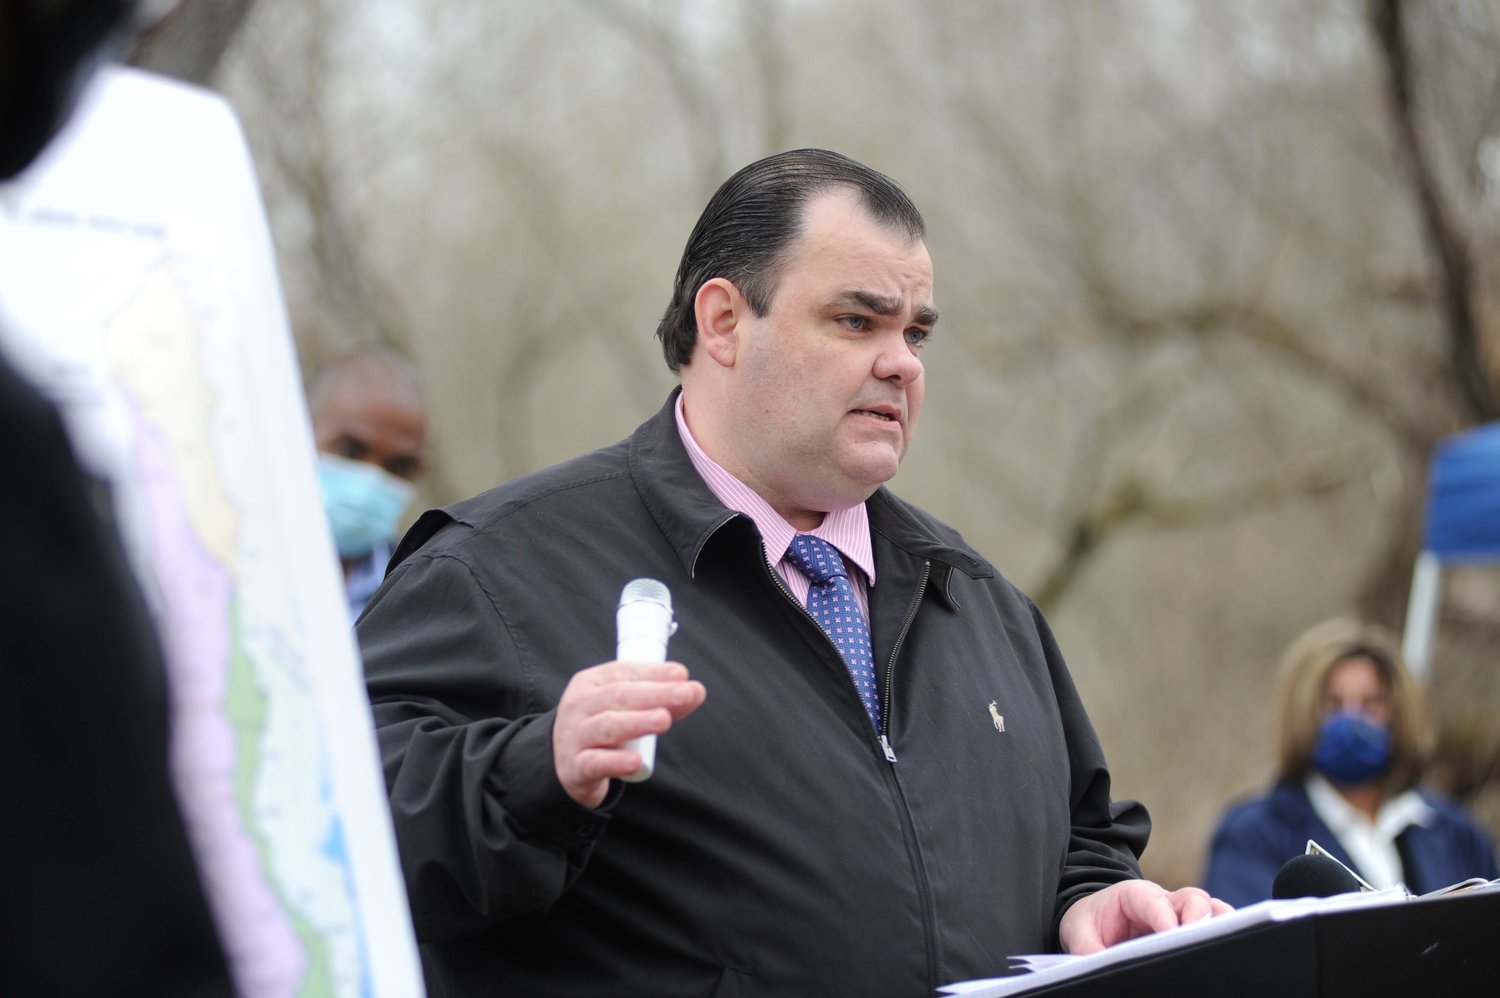 Rob Doherty, pictured at an announcement of the bi-partisan formation of a Congressional Caucus for the Delaware River Watershed.